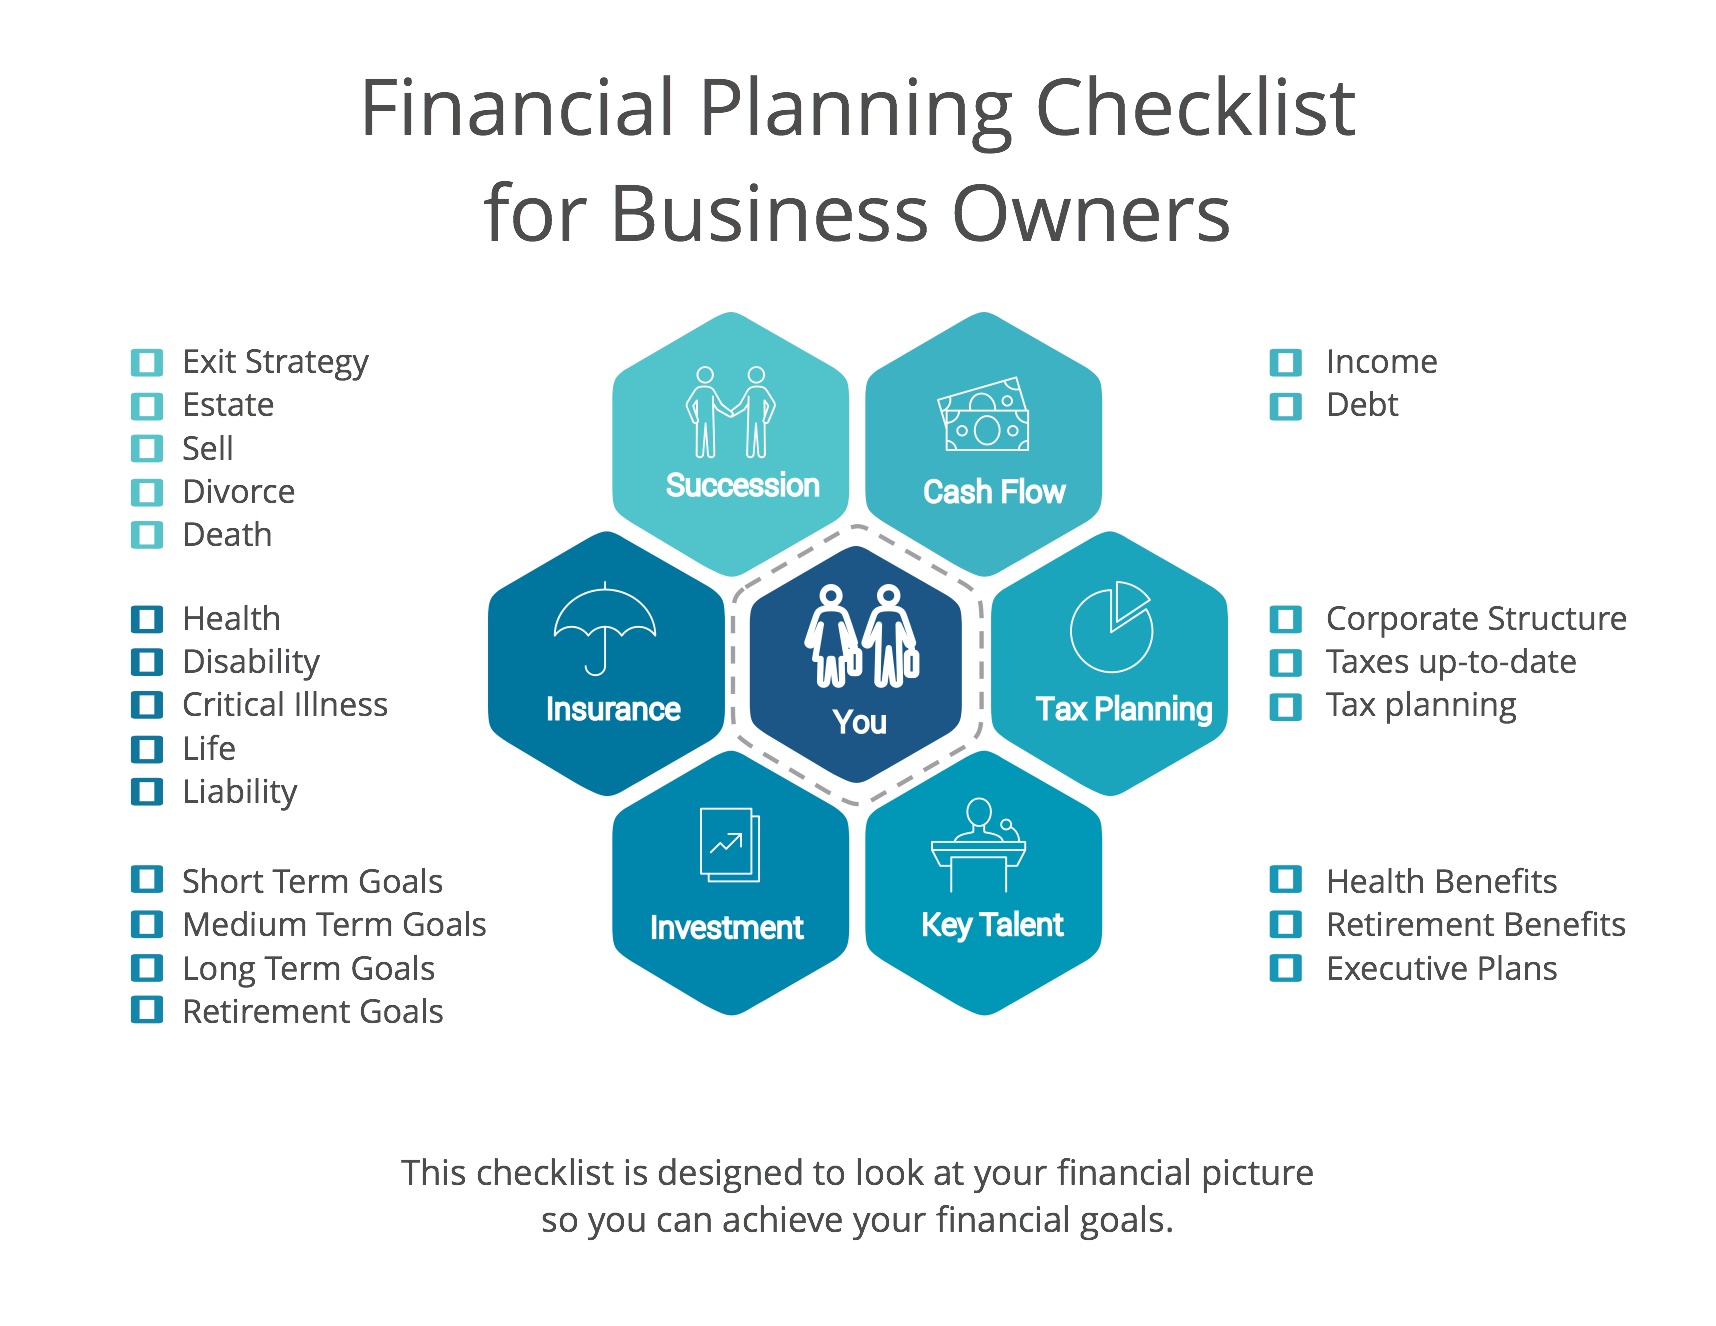 how to develop a financial plan for business